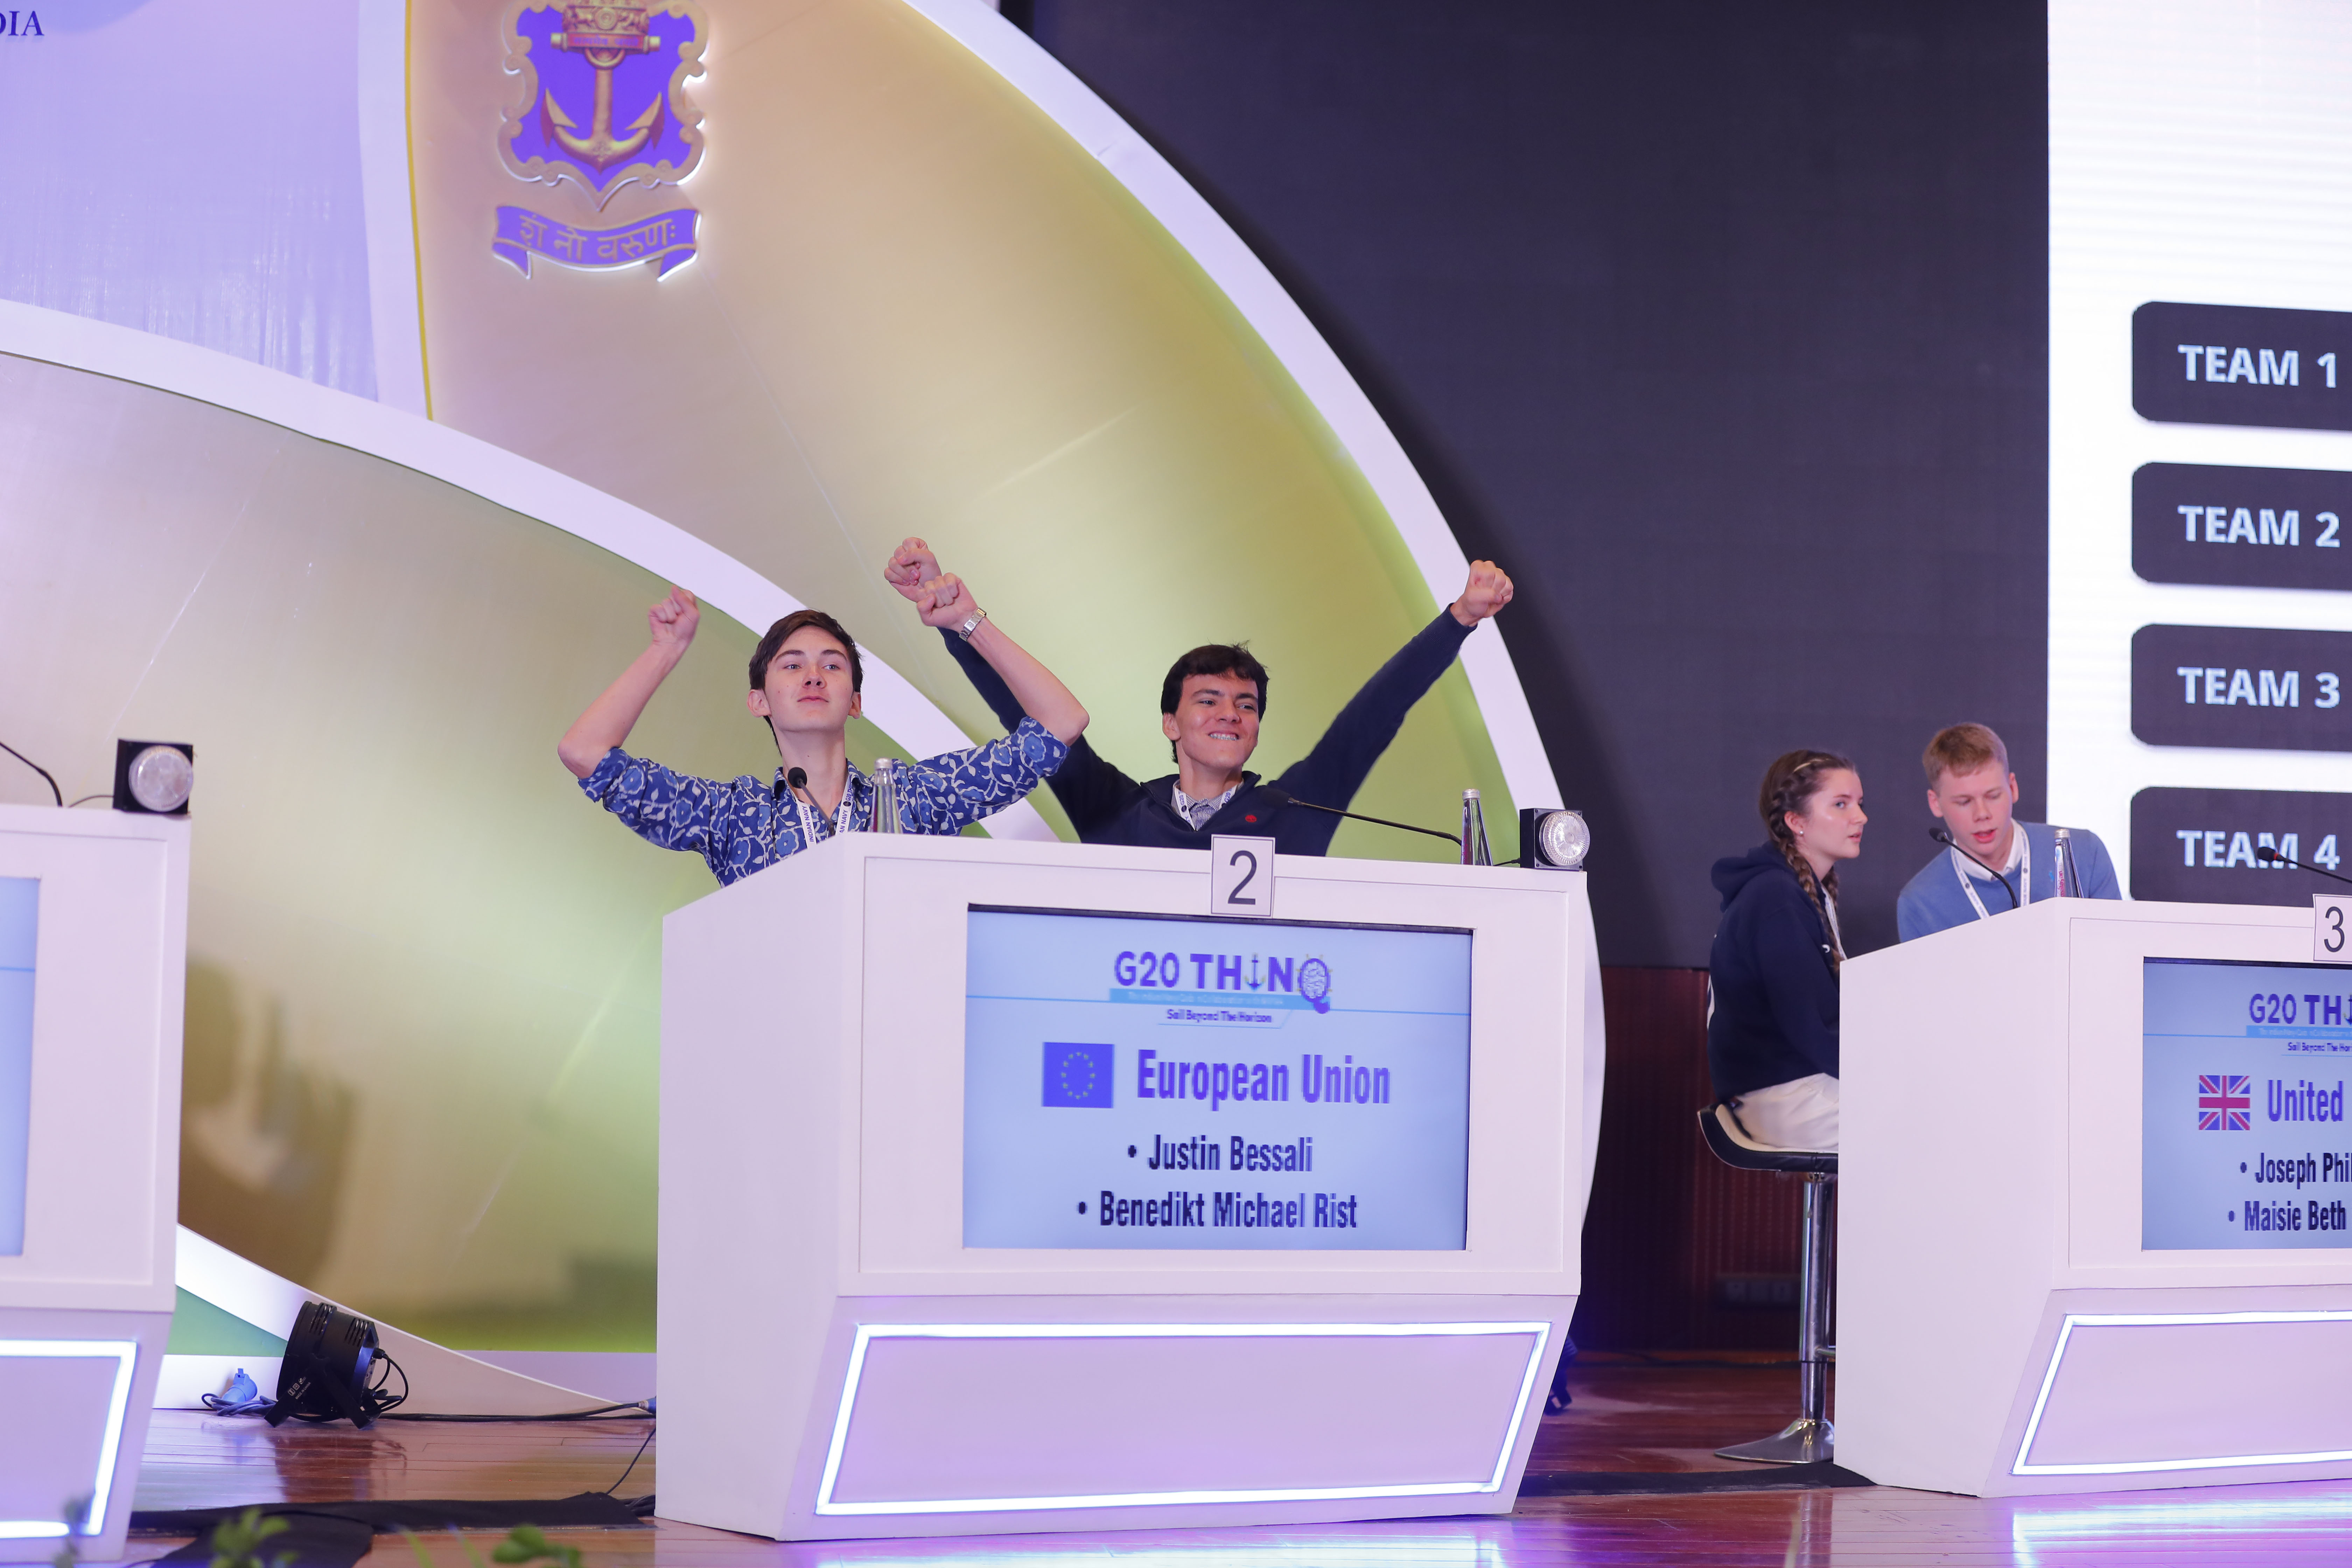 The Indian Navy Quiz – G20 Thinq  International Finals at Indiagate ON 23 NOV 23